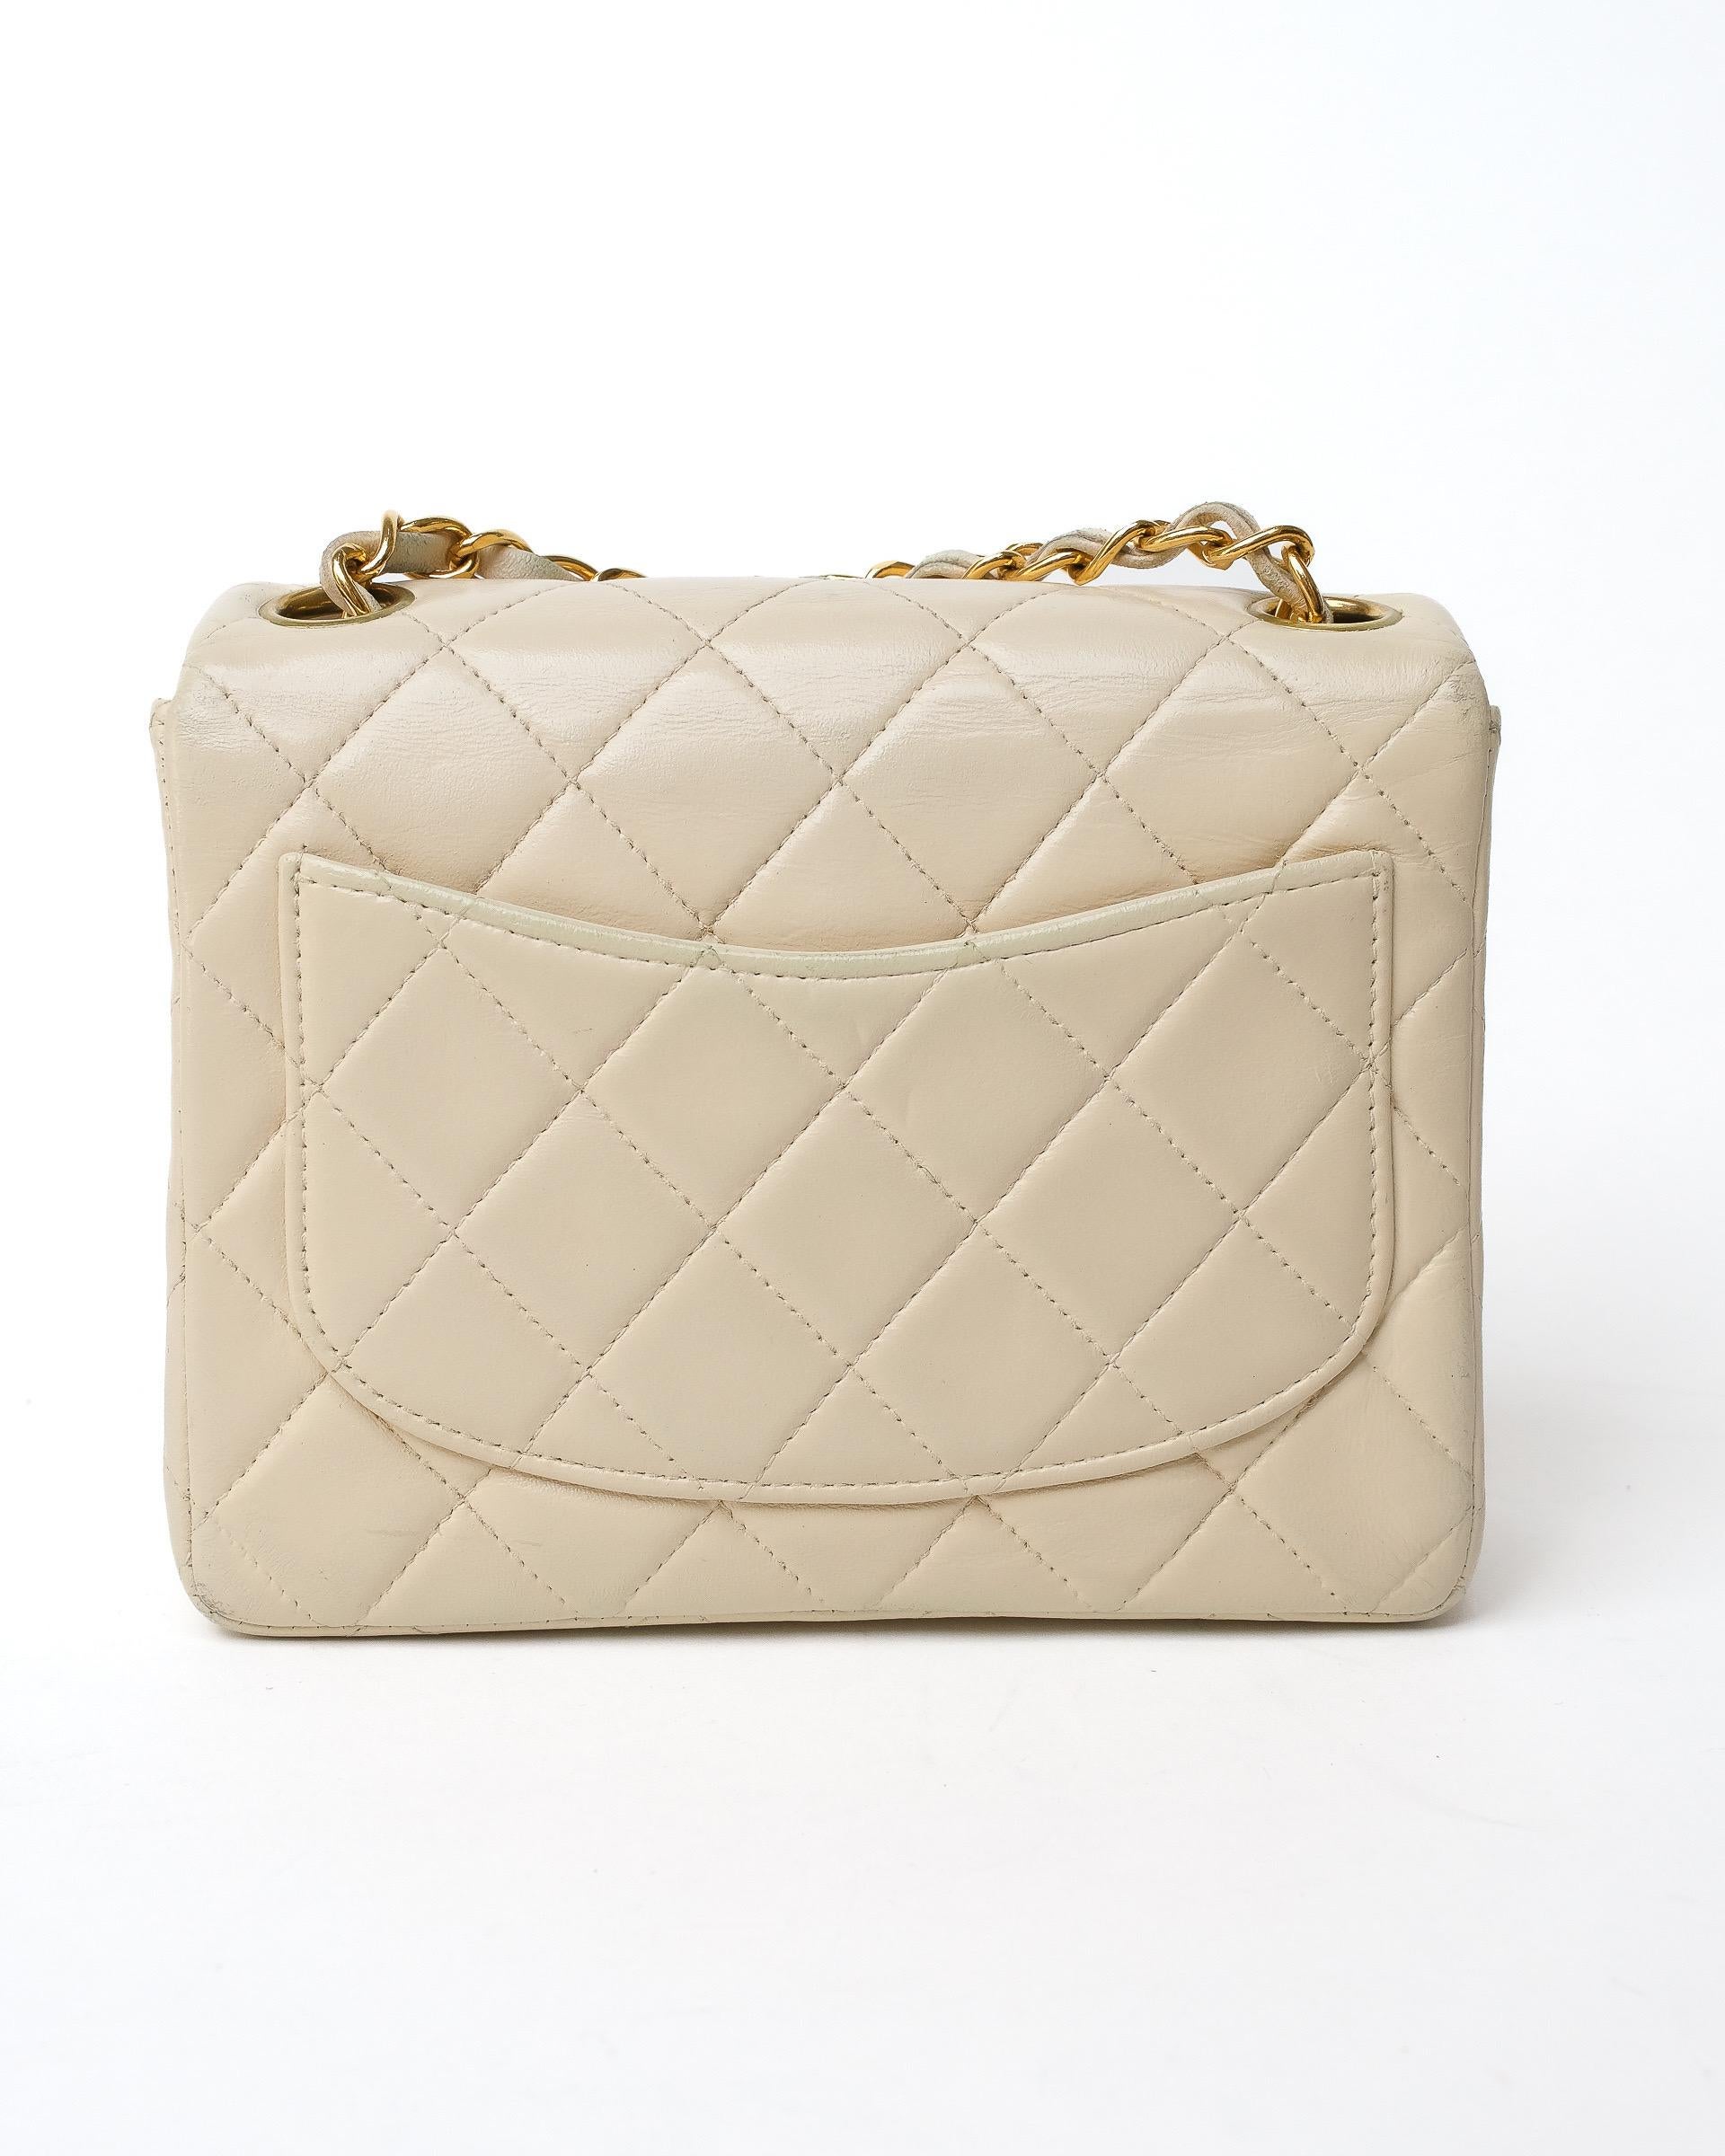 Chanel Mini Flap Timeless Crema For Sale 2